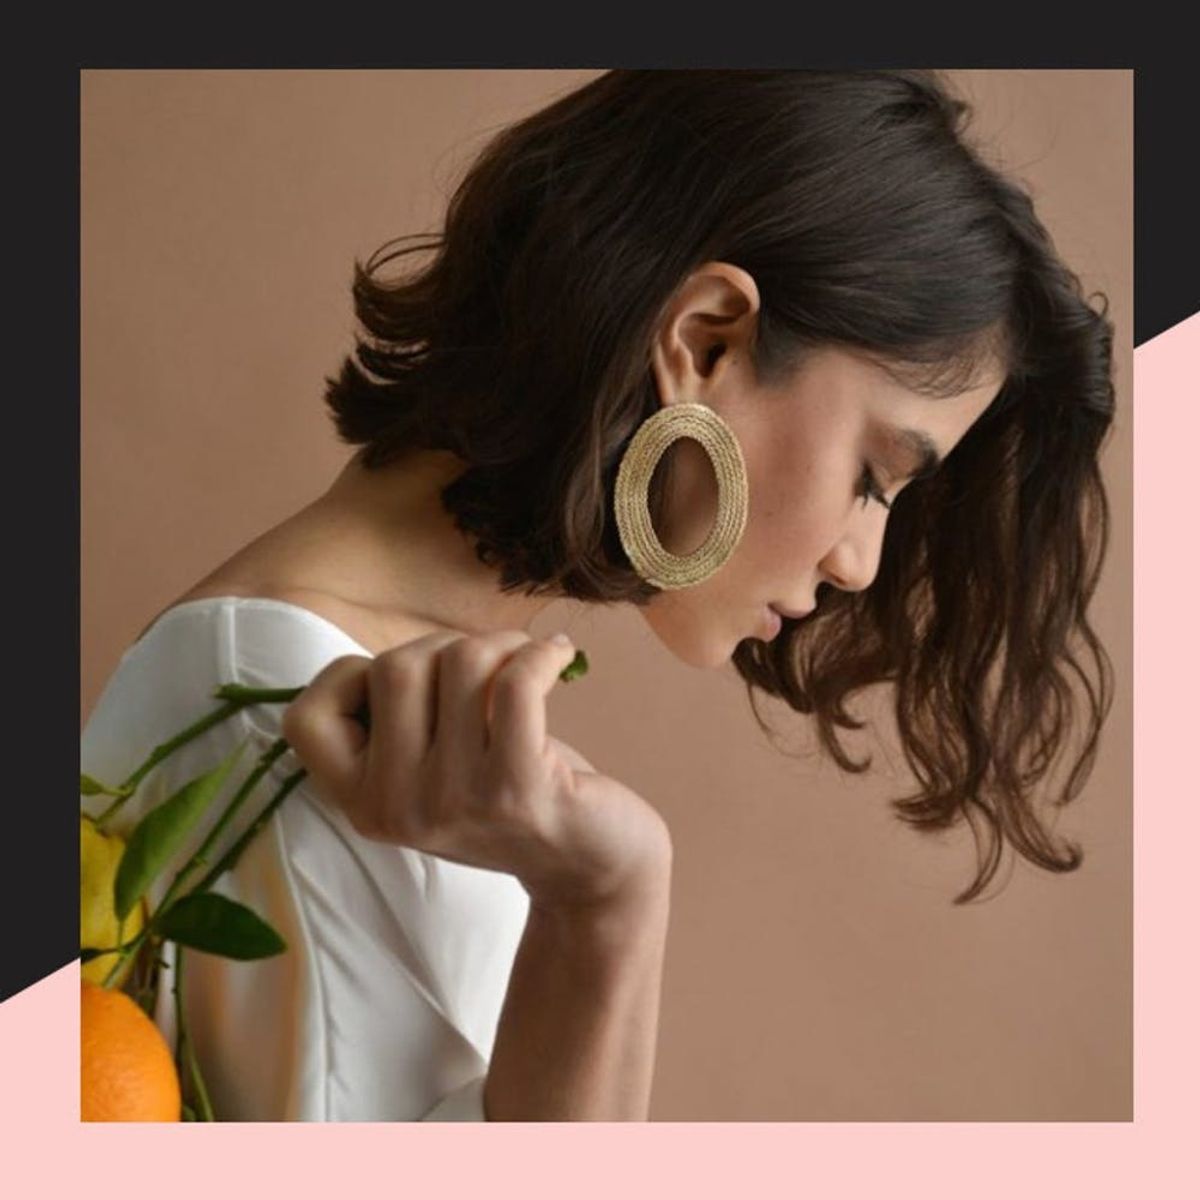 Oversized Earrings Are the Spring Accessory You Didn’t Know You Needed